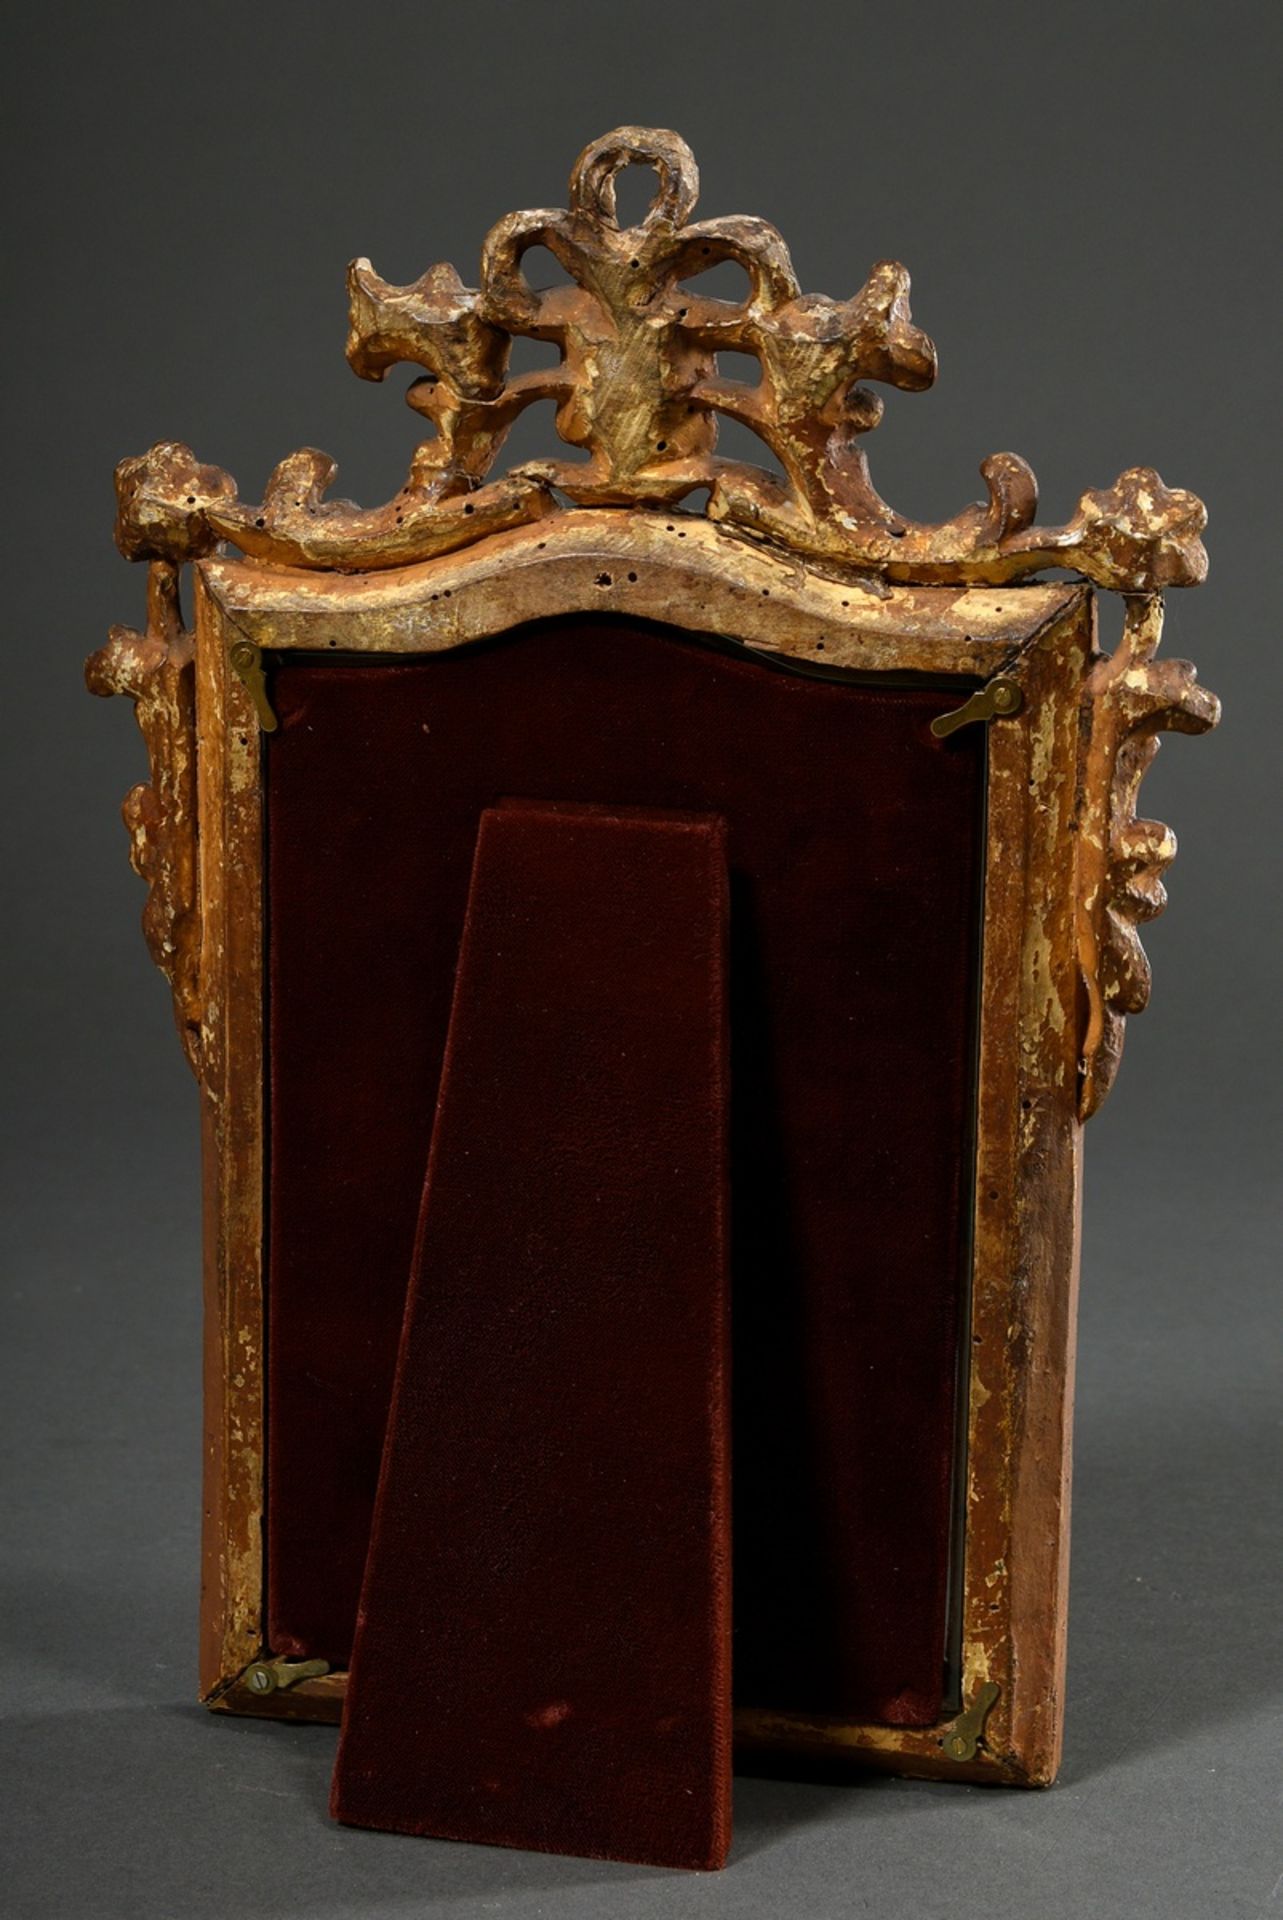 Small baroque frame with floral openwork crowning and beaded rim, wood carved and gilded, FM 19x13c - Image 2 of 2